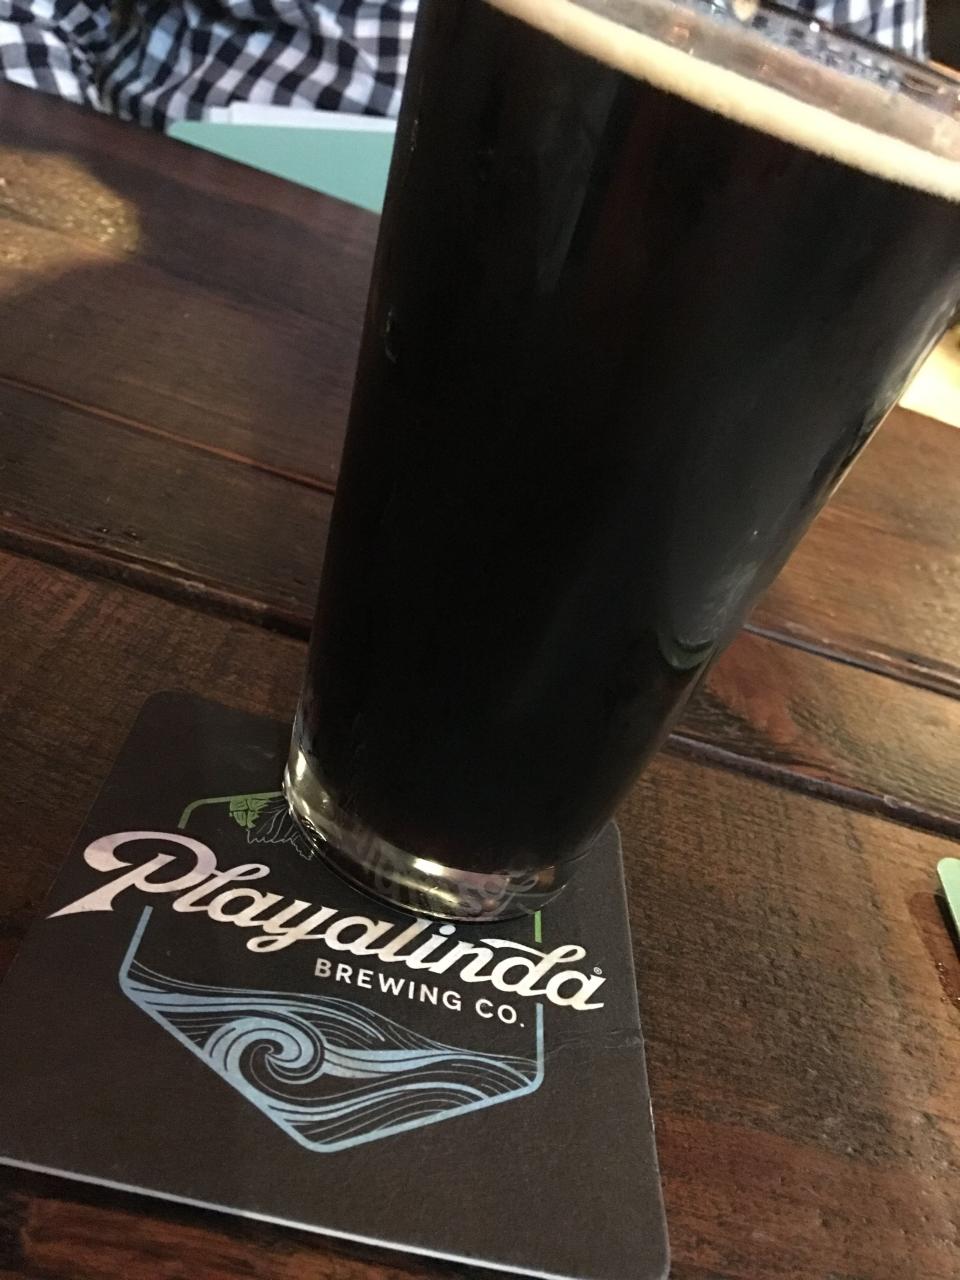 Playalinda Brewing Co. Brix Project in Titusville isn't just for the adults. The family-friendly venue makes some pretty good root beer, too.